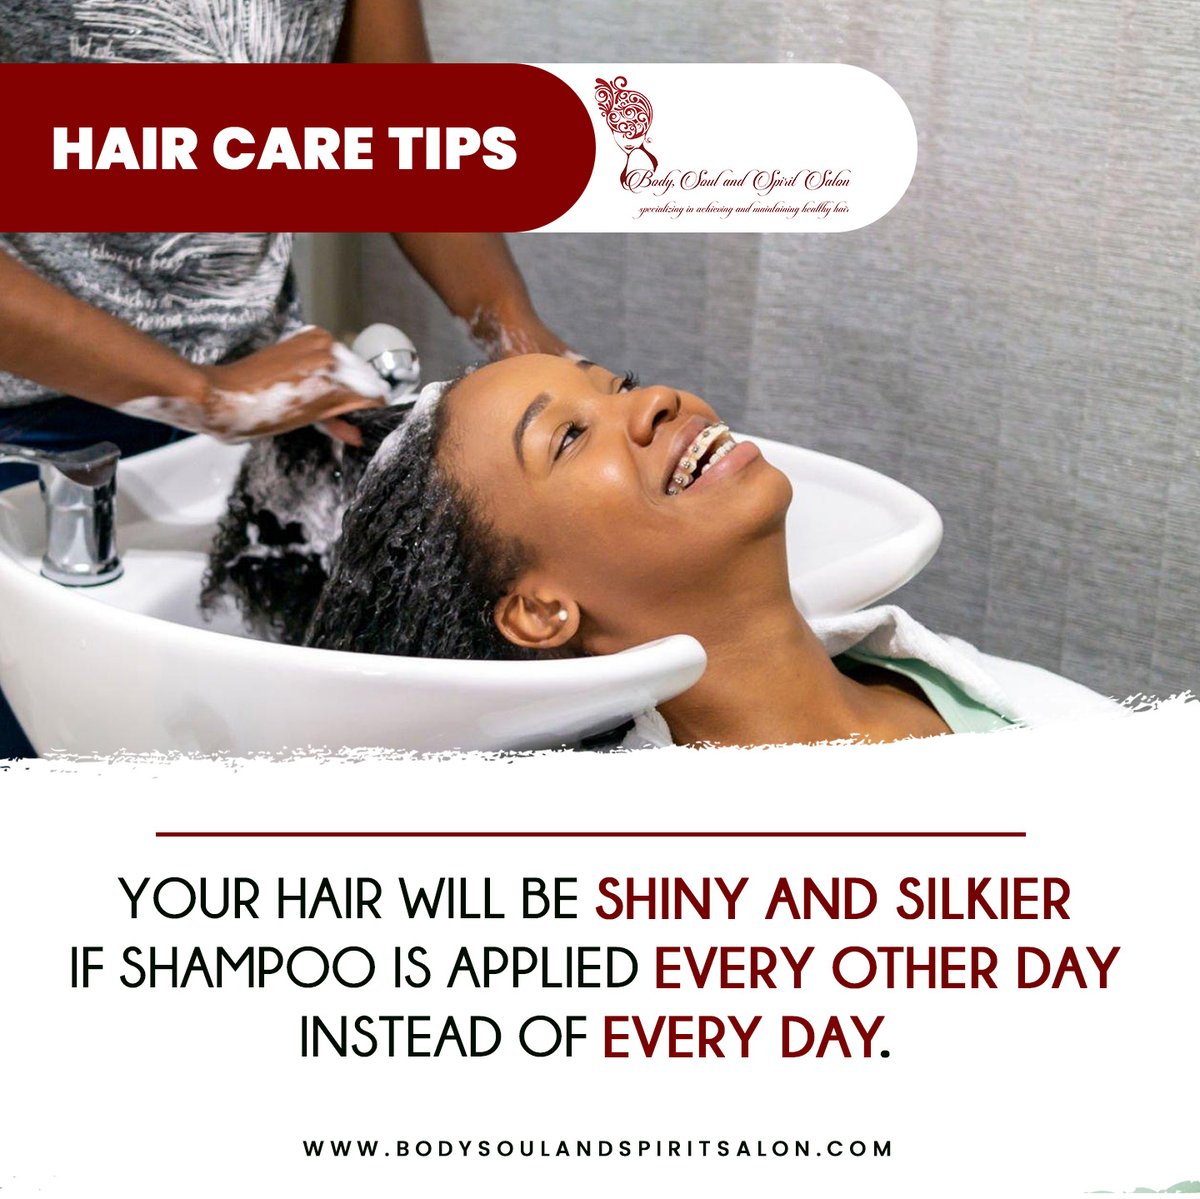 Hair Care Tips: 
Your hair will be shiny and silkier if shampoo is applied every other day instead of every day. 

#HairCareTips #BodySoulSpirit #DidYouKnow #HairGoals #HairCare #HealthyHair